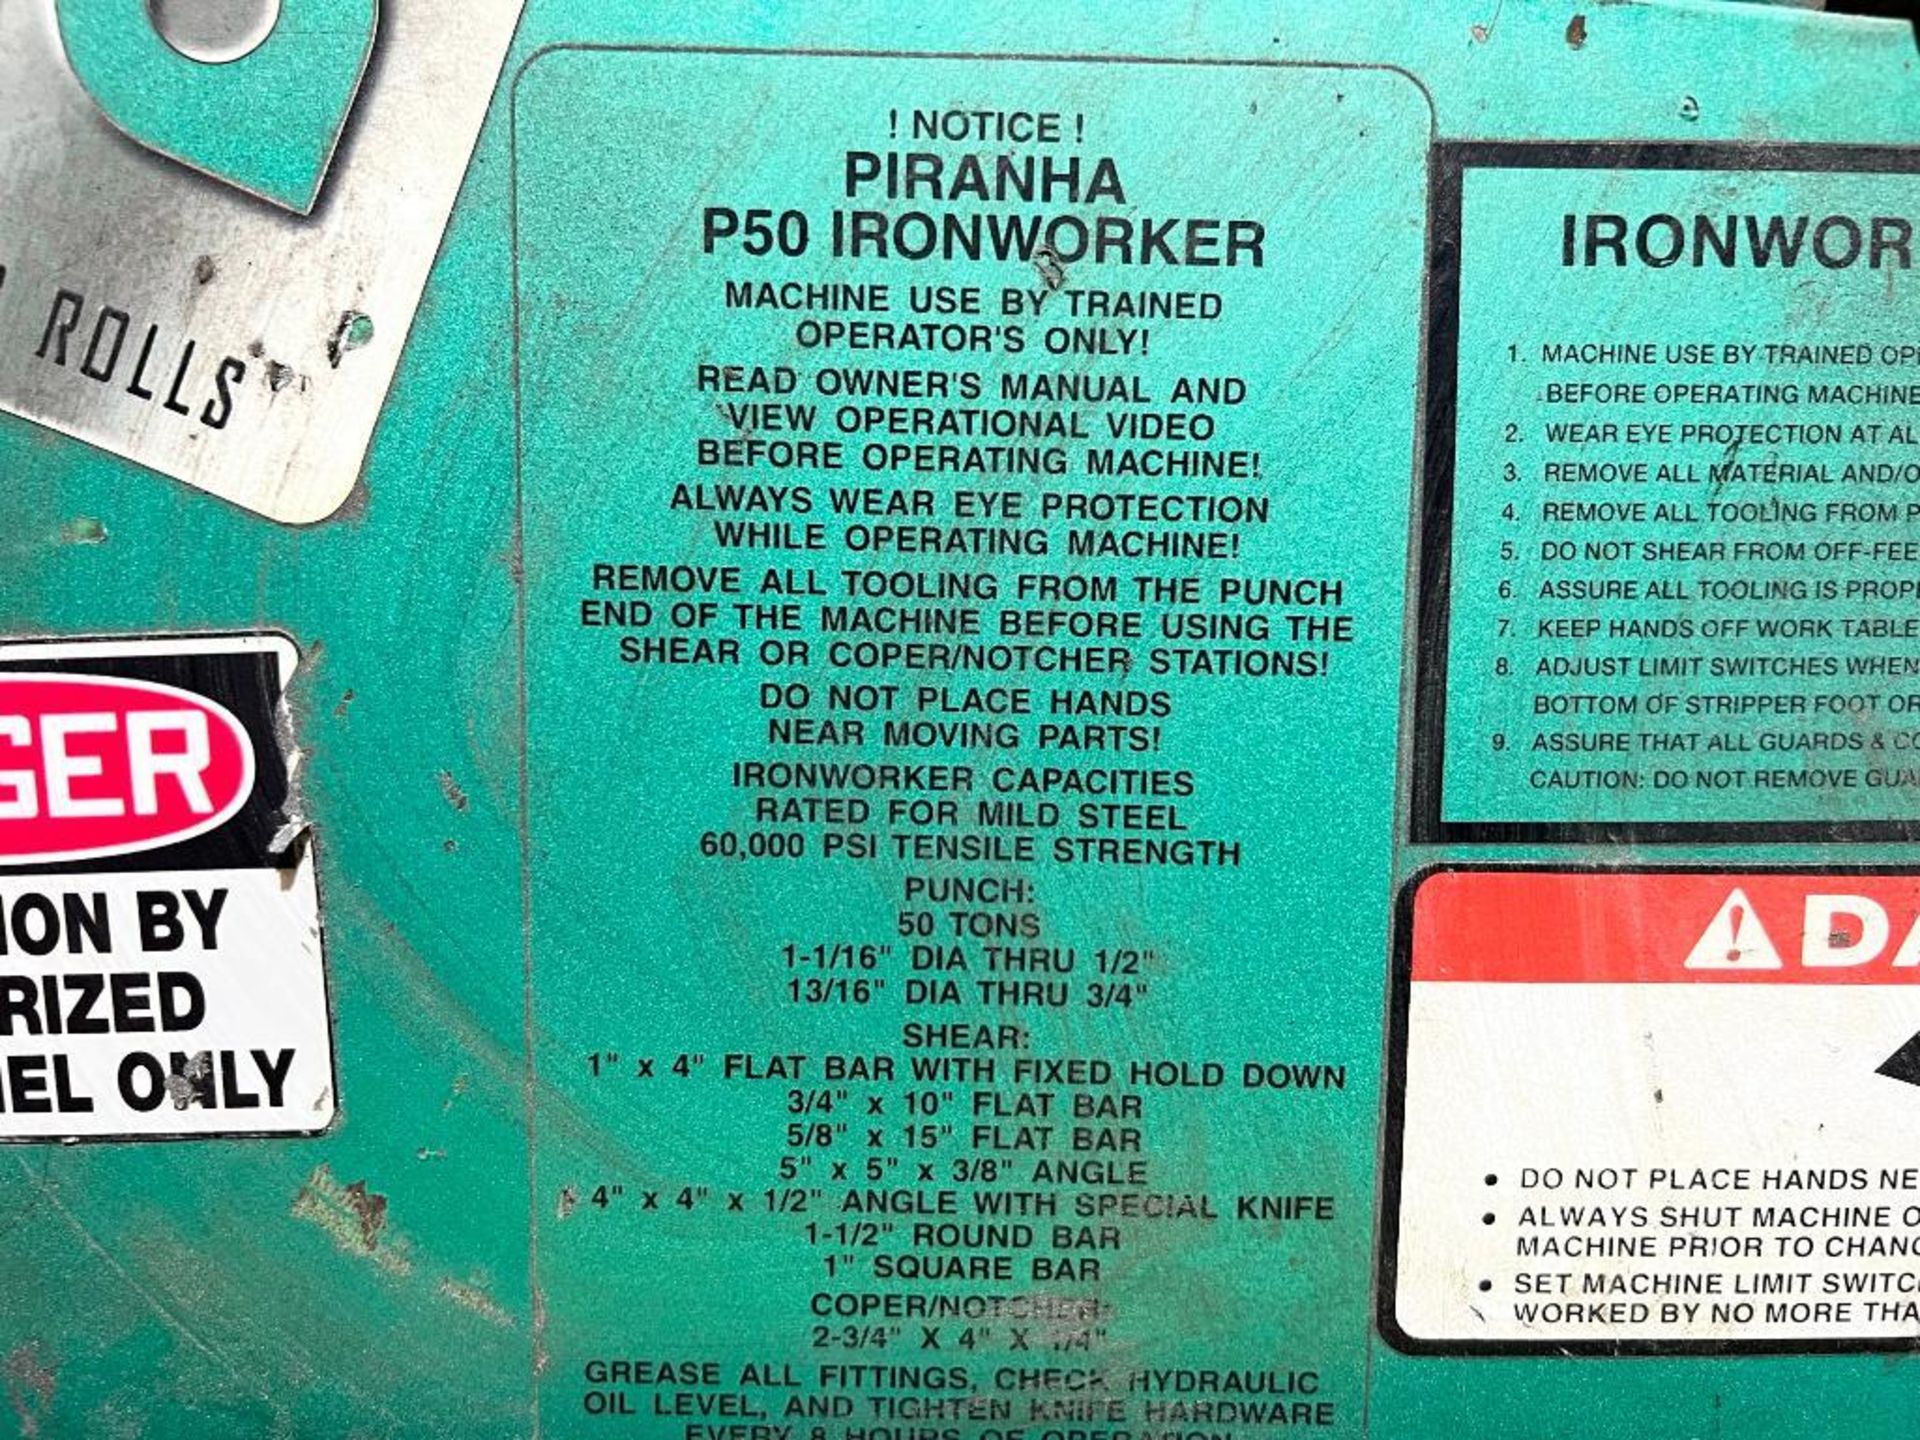 Piranha Hydraulic Ironworker Model P50, S/N P50-10522, with Tooling and Accessories - Image 4 of 12